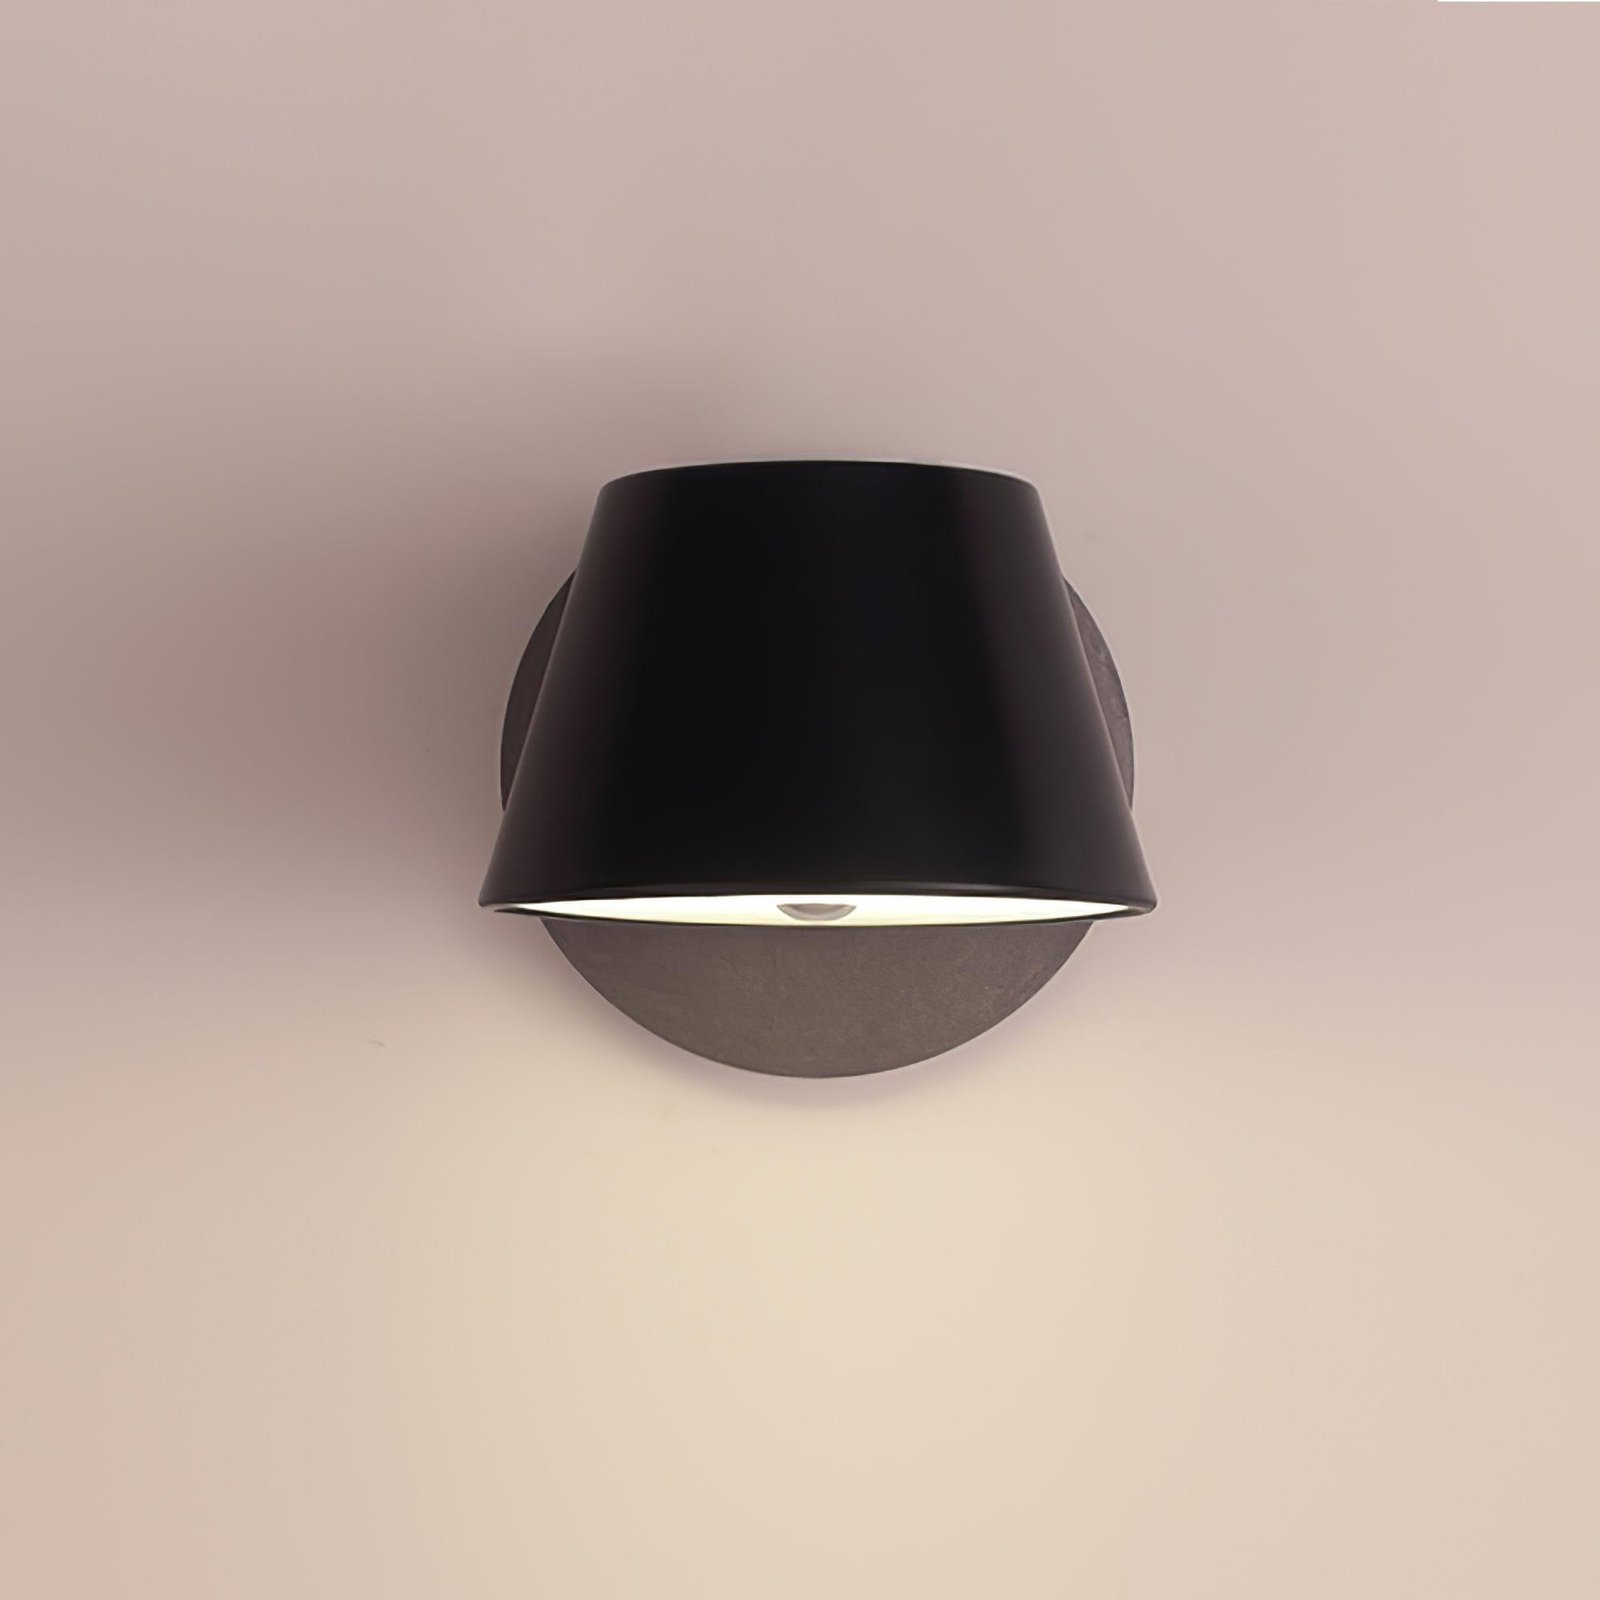 Black Tam Tam Wall Lamp Set of 2, with a Diameter of 16cm and Height of 16cm, Emitting Cool White Light.